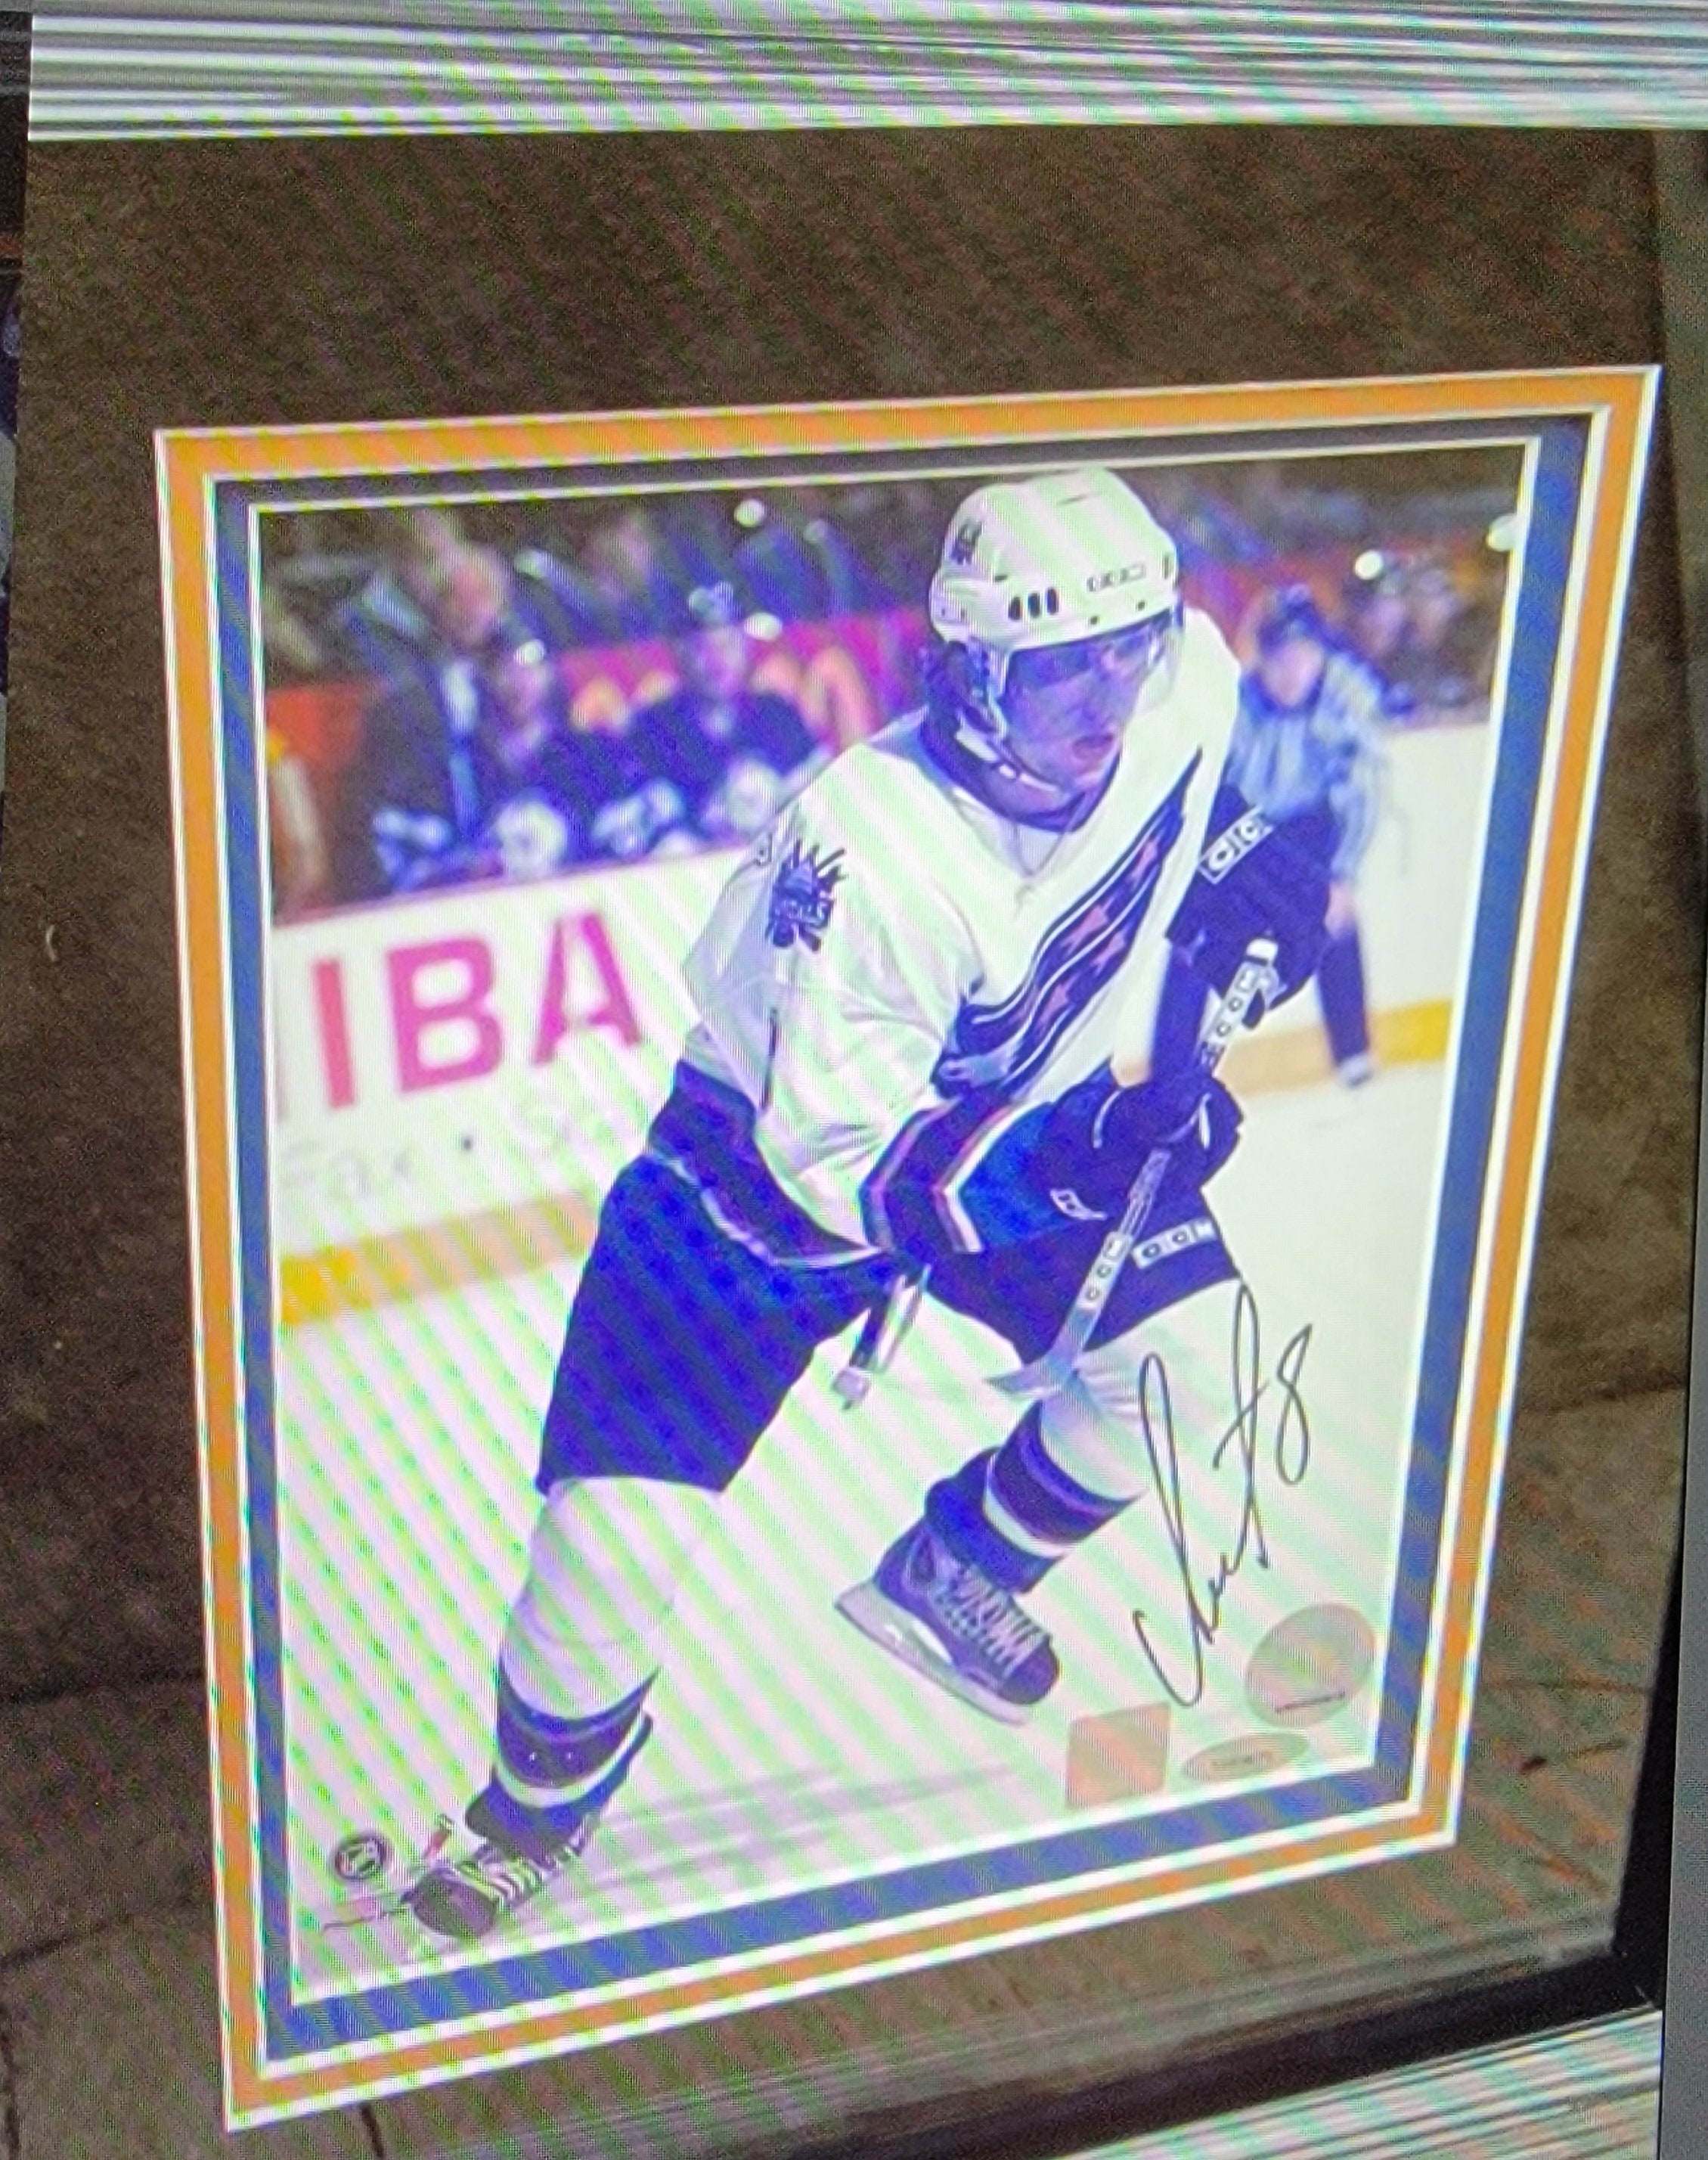 ross colton signed autograph 8x10 photo tampa bay lightning stanley cup NHL